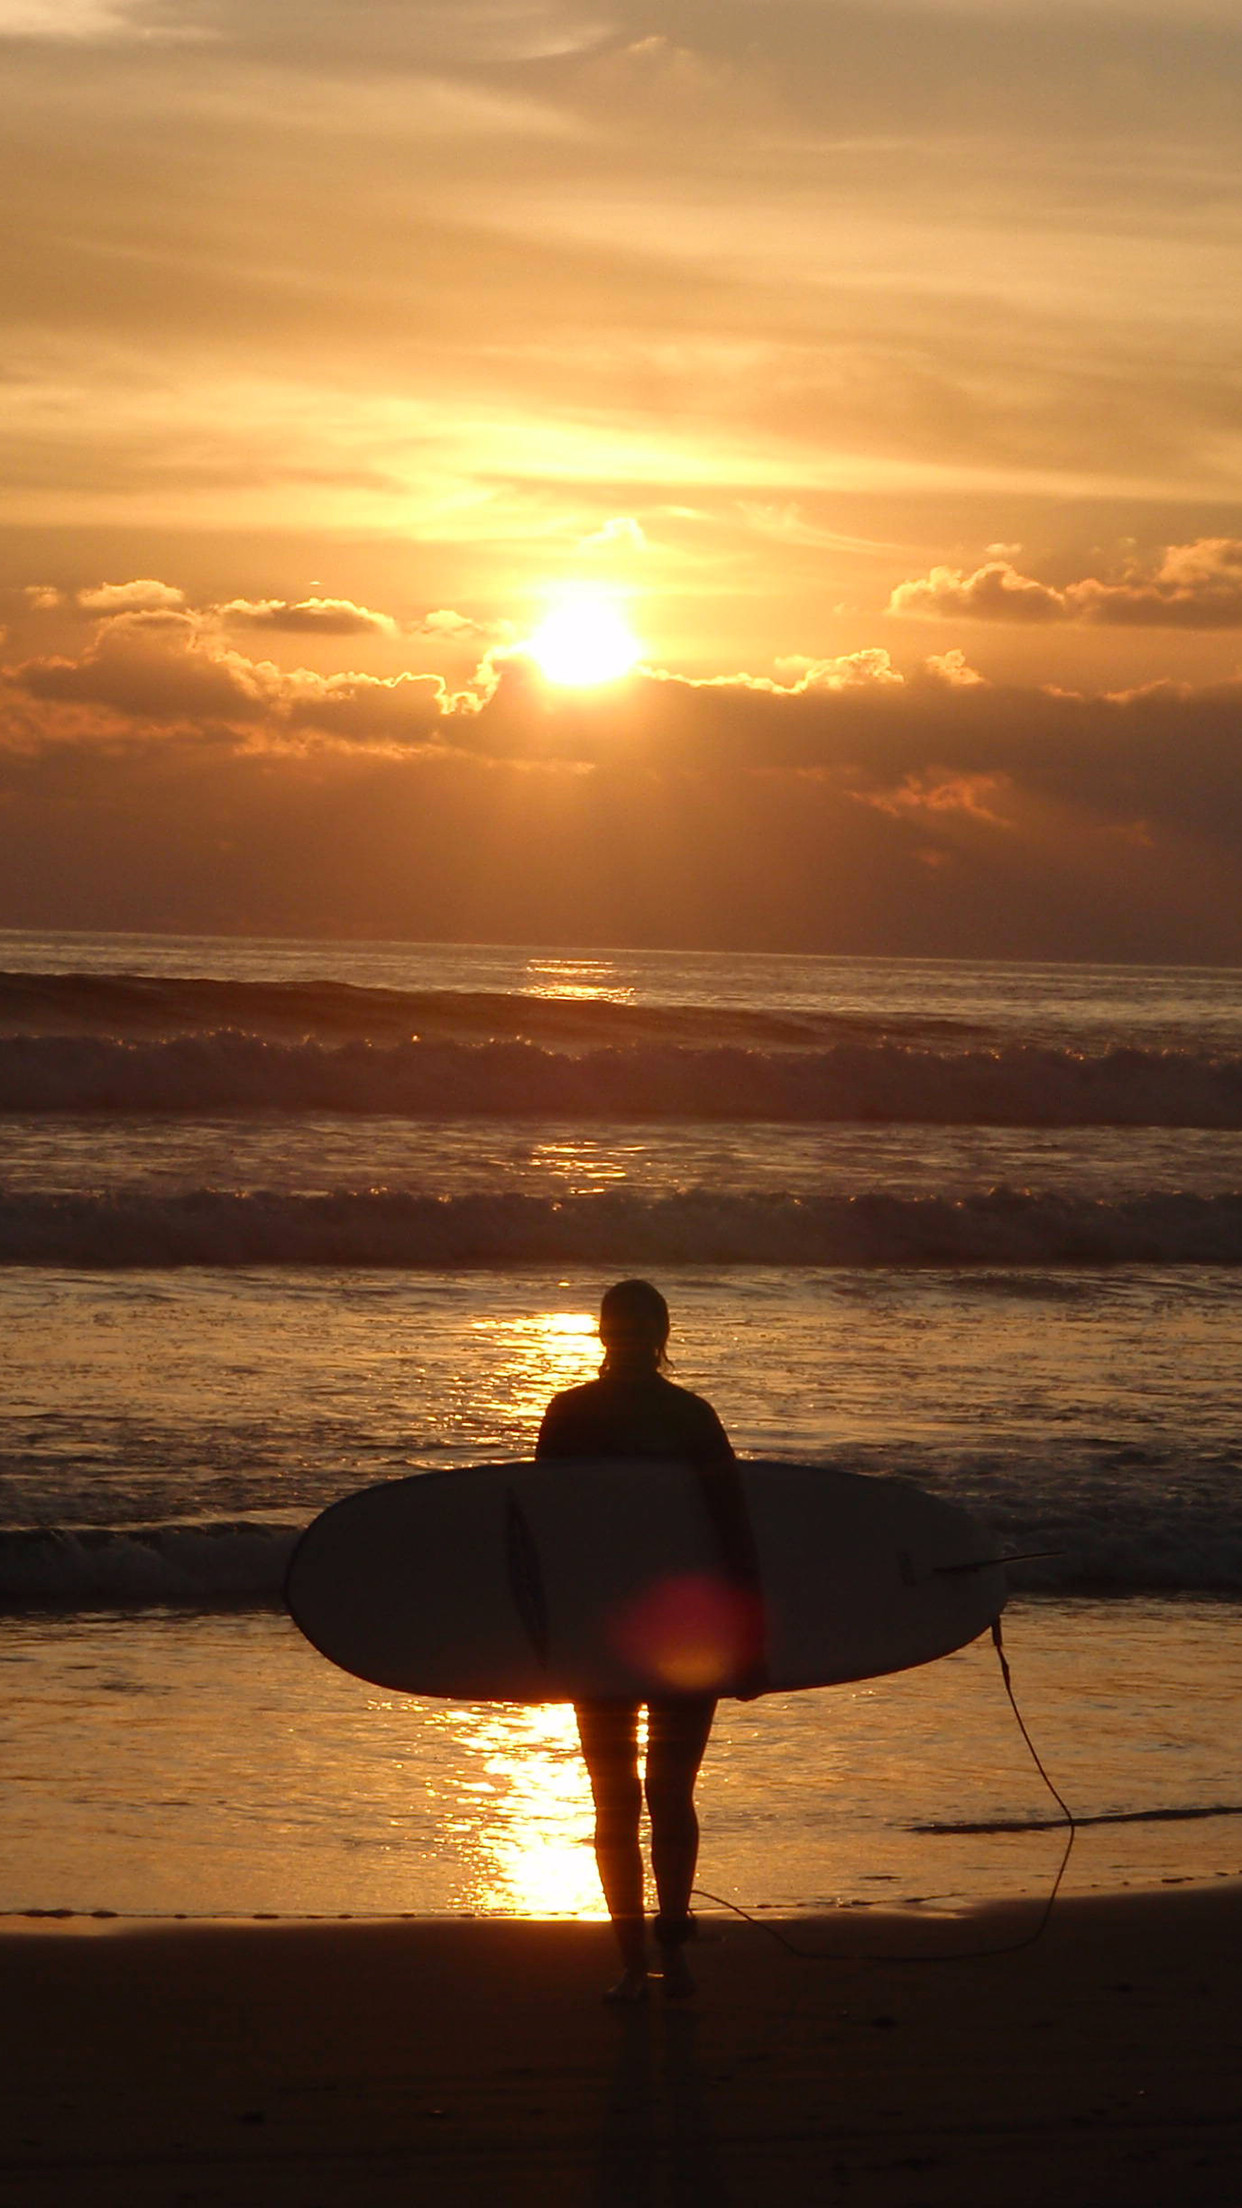 Surfing Sunset iPhone Parallax 3Wallpapers Les 3 Wallpapers iPhone du